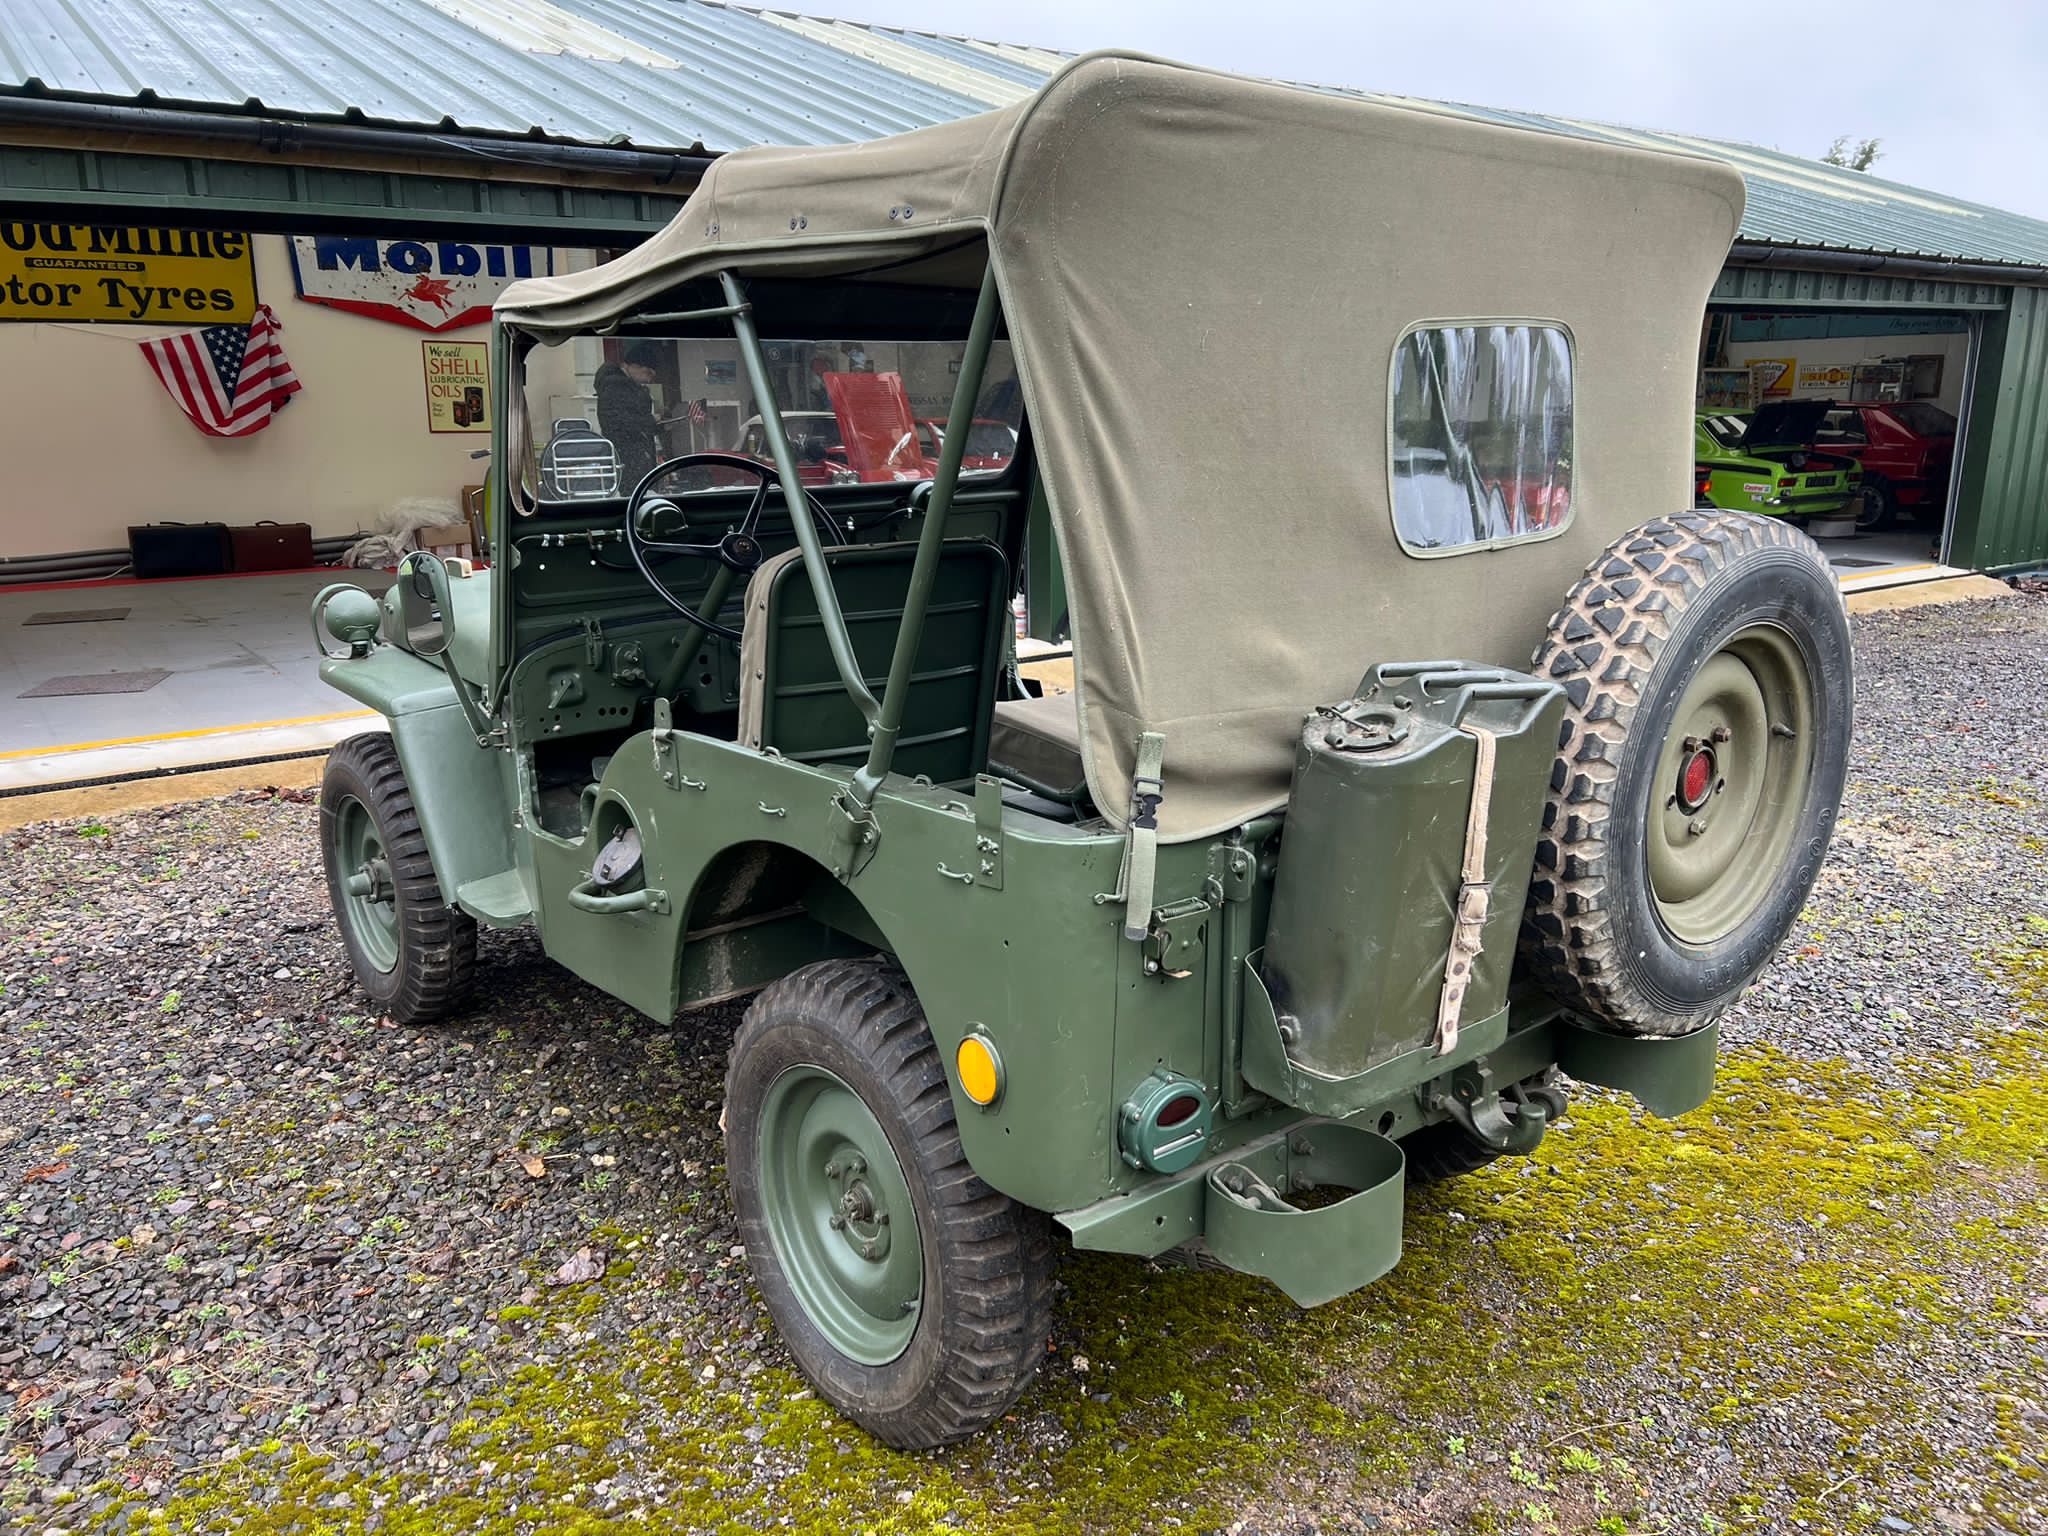 Willys Jeep Model M38 c1947 - Image 4 of 13